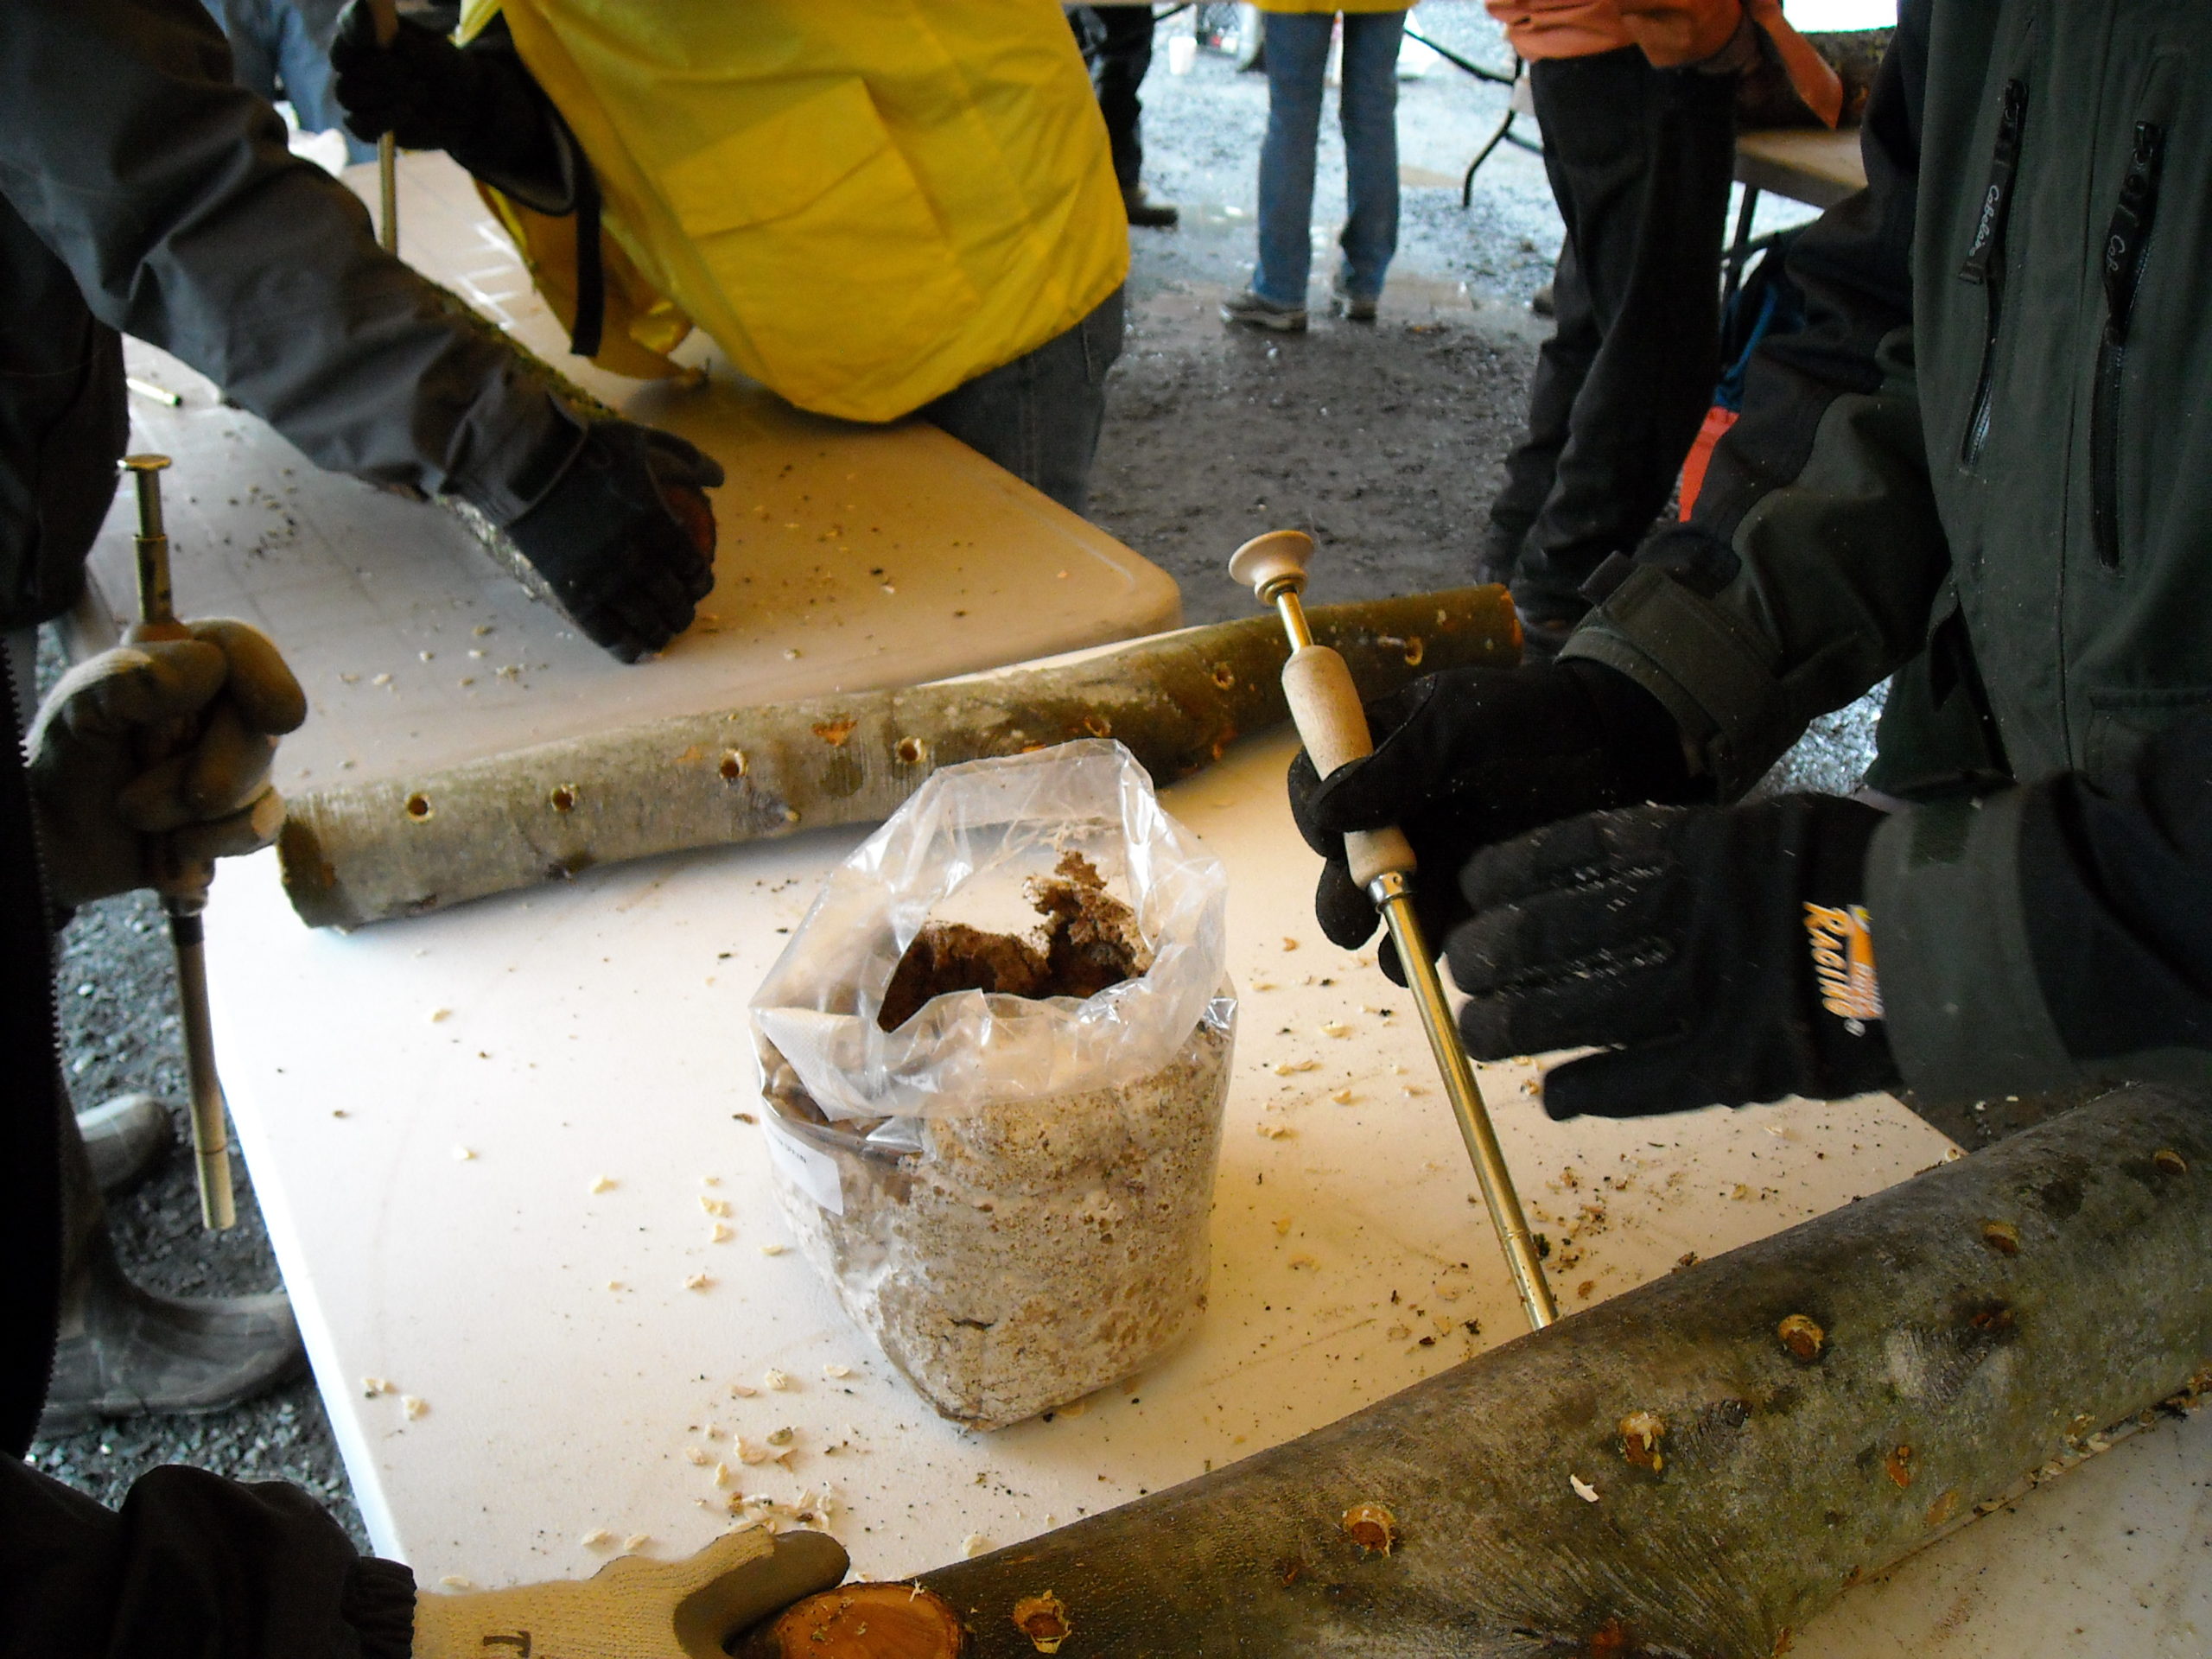 A pair of hands holds an inoculator near a bag of sawdust spawn.